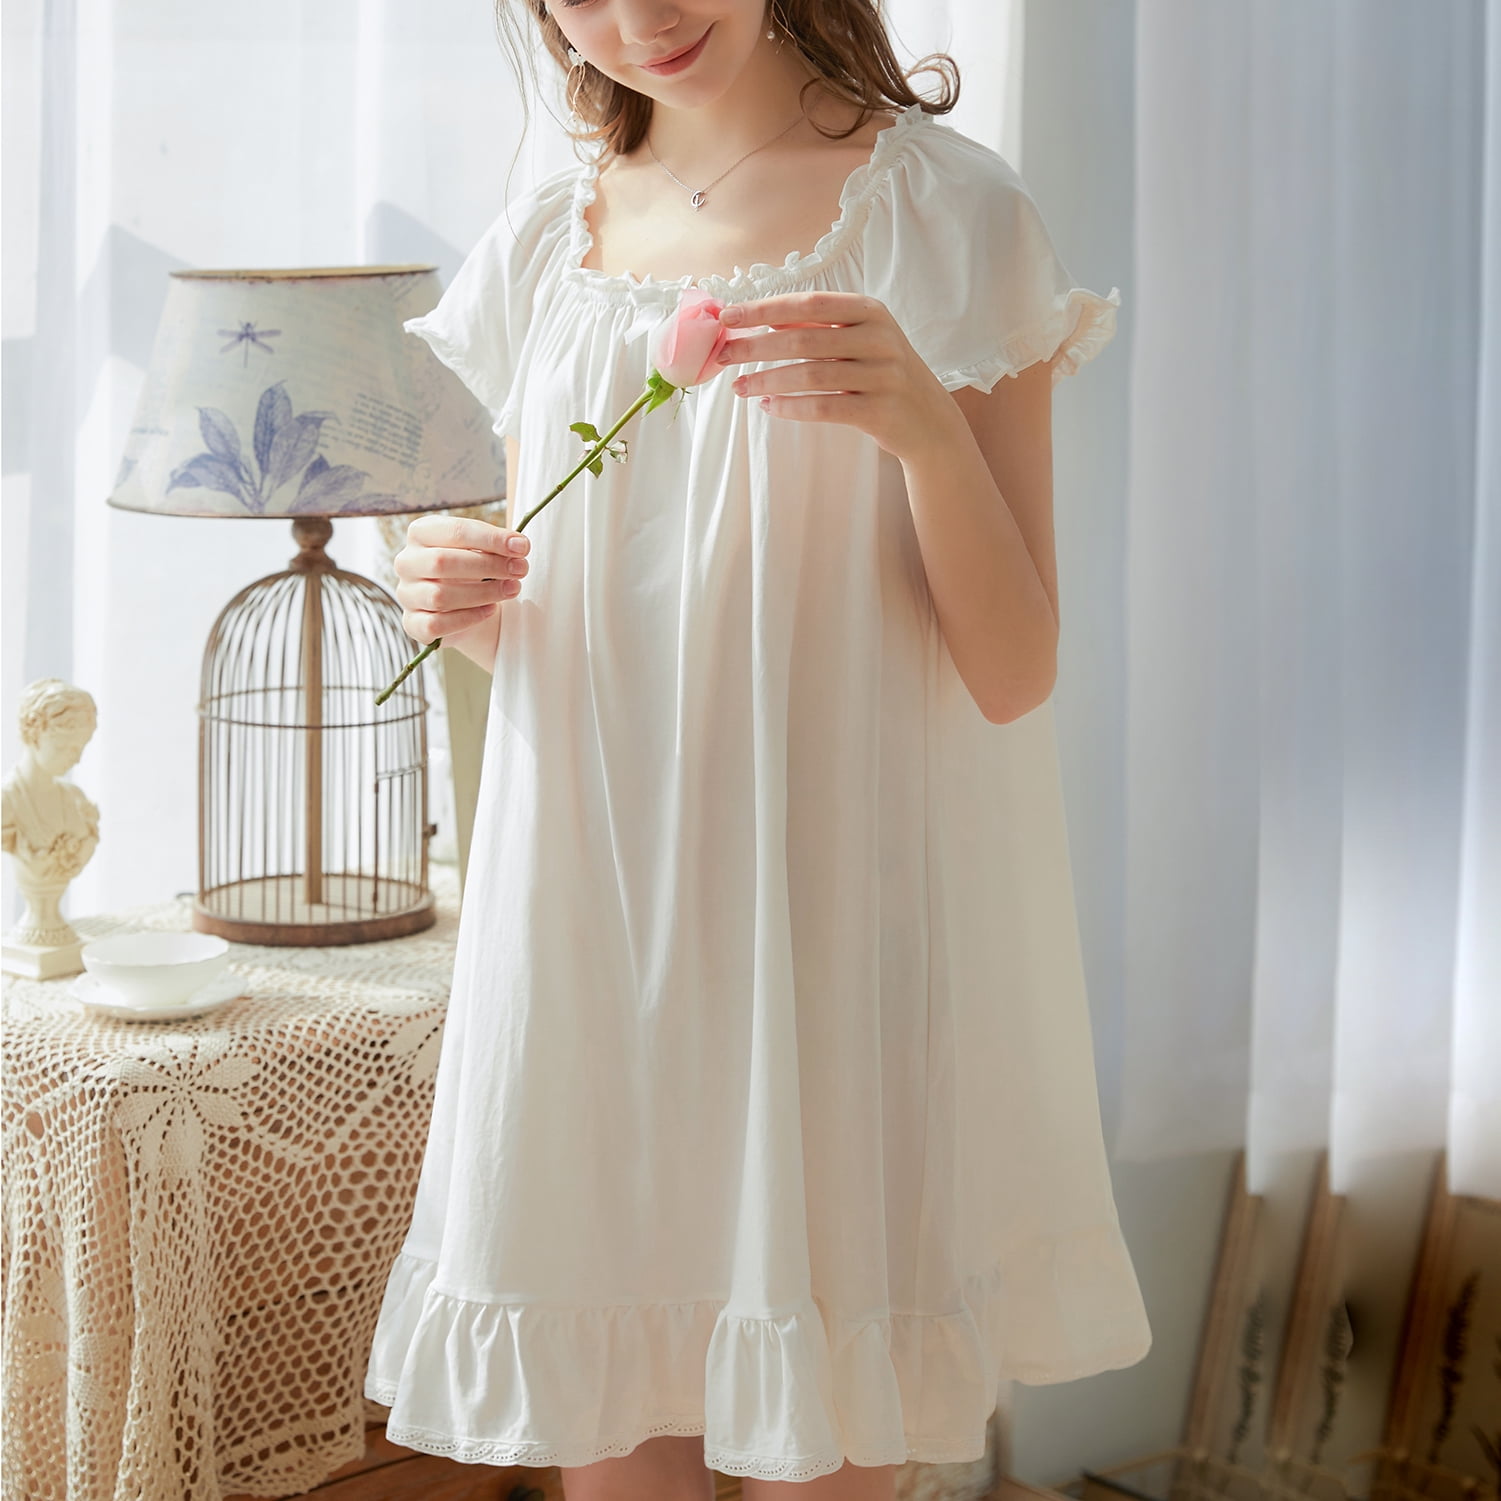 a christopher gerwig recommends girls old fashioned nightgown pic